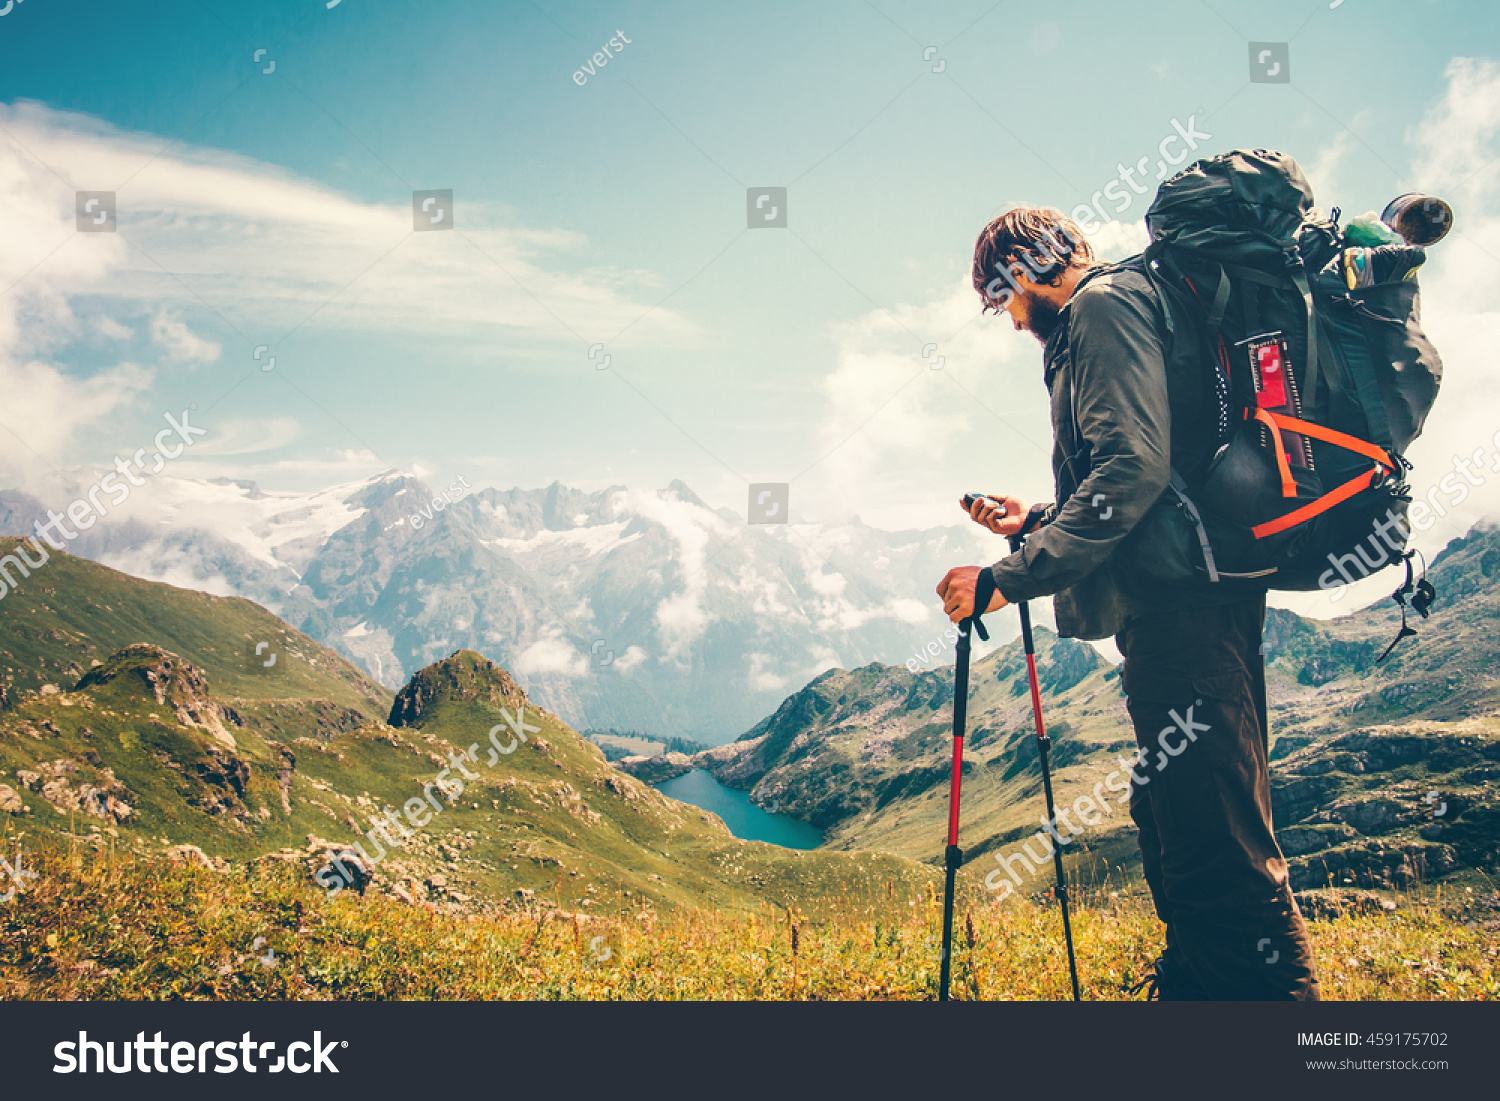 Man Traveler backpacker with gps navigator tracker looking for coordinates Travel Lifestyle concept mountains and lake on background survival adventure vacations outdoor #459175702